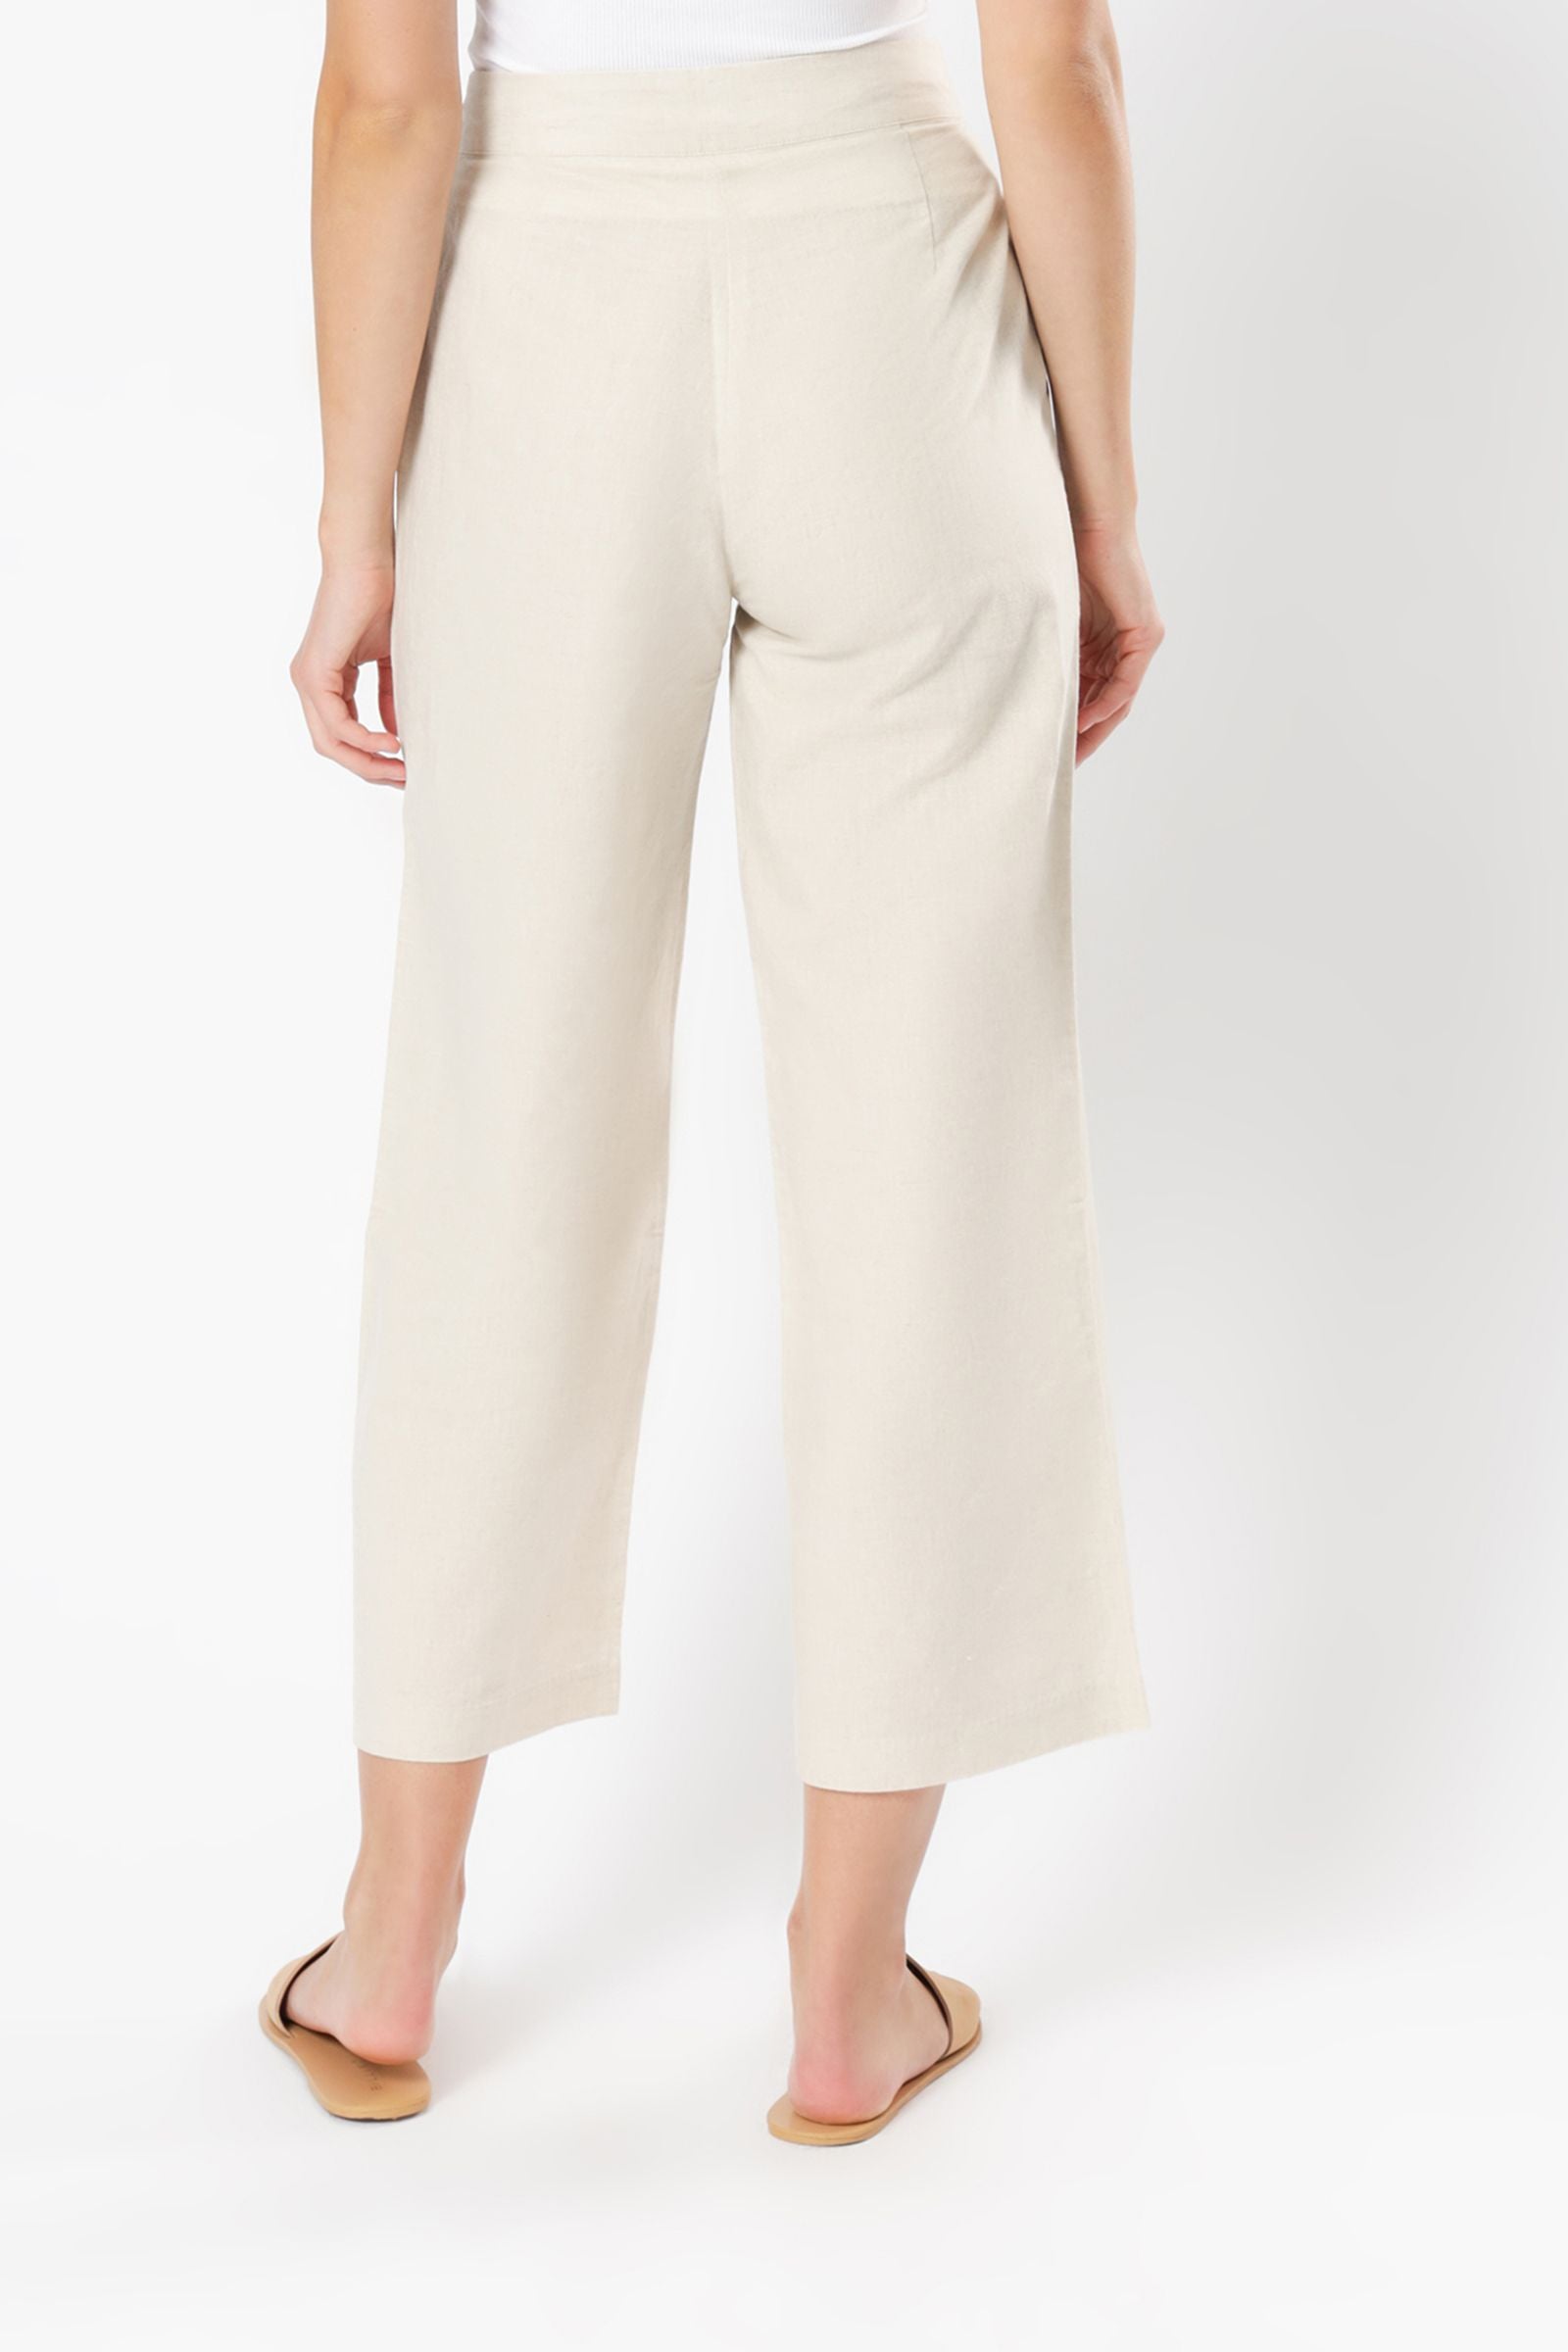 Nude Lucy drew pant oat pants